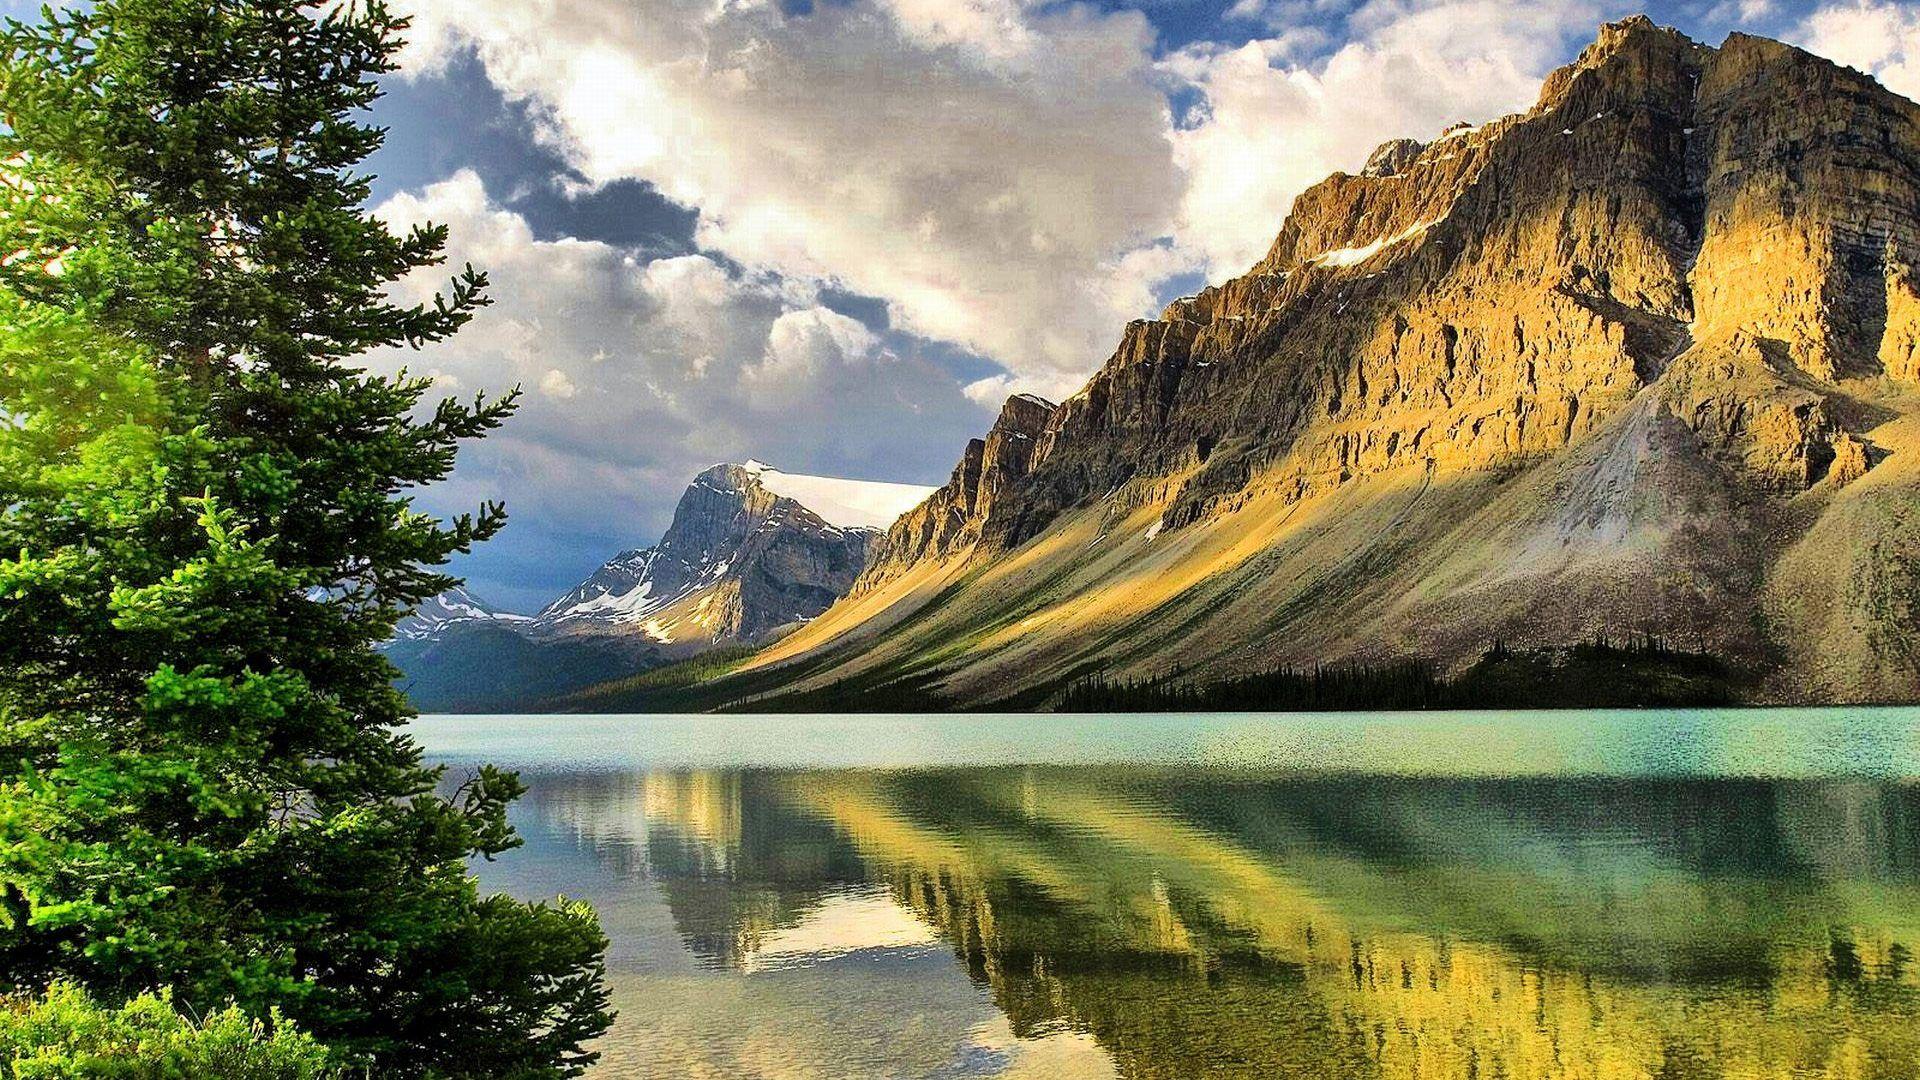 Lakes: Lake Trees Clouds Reflection Mountain Sunny Sky Wallpaper